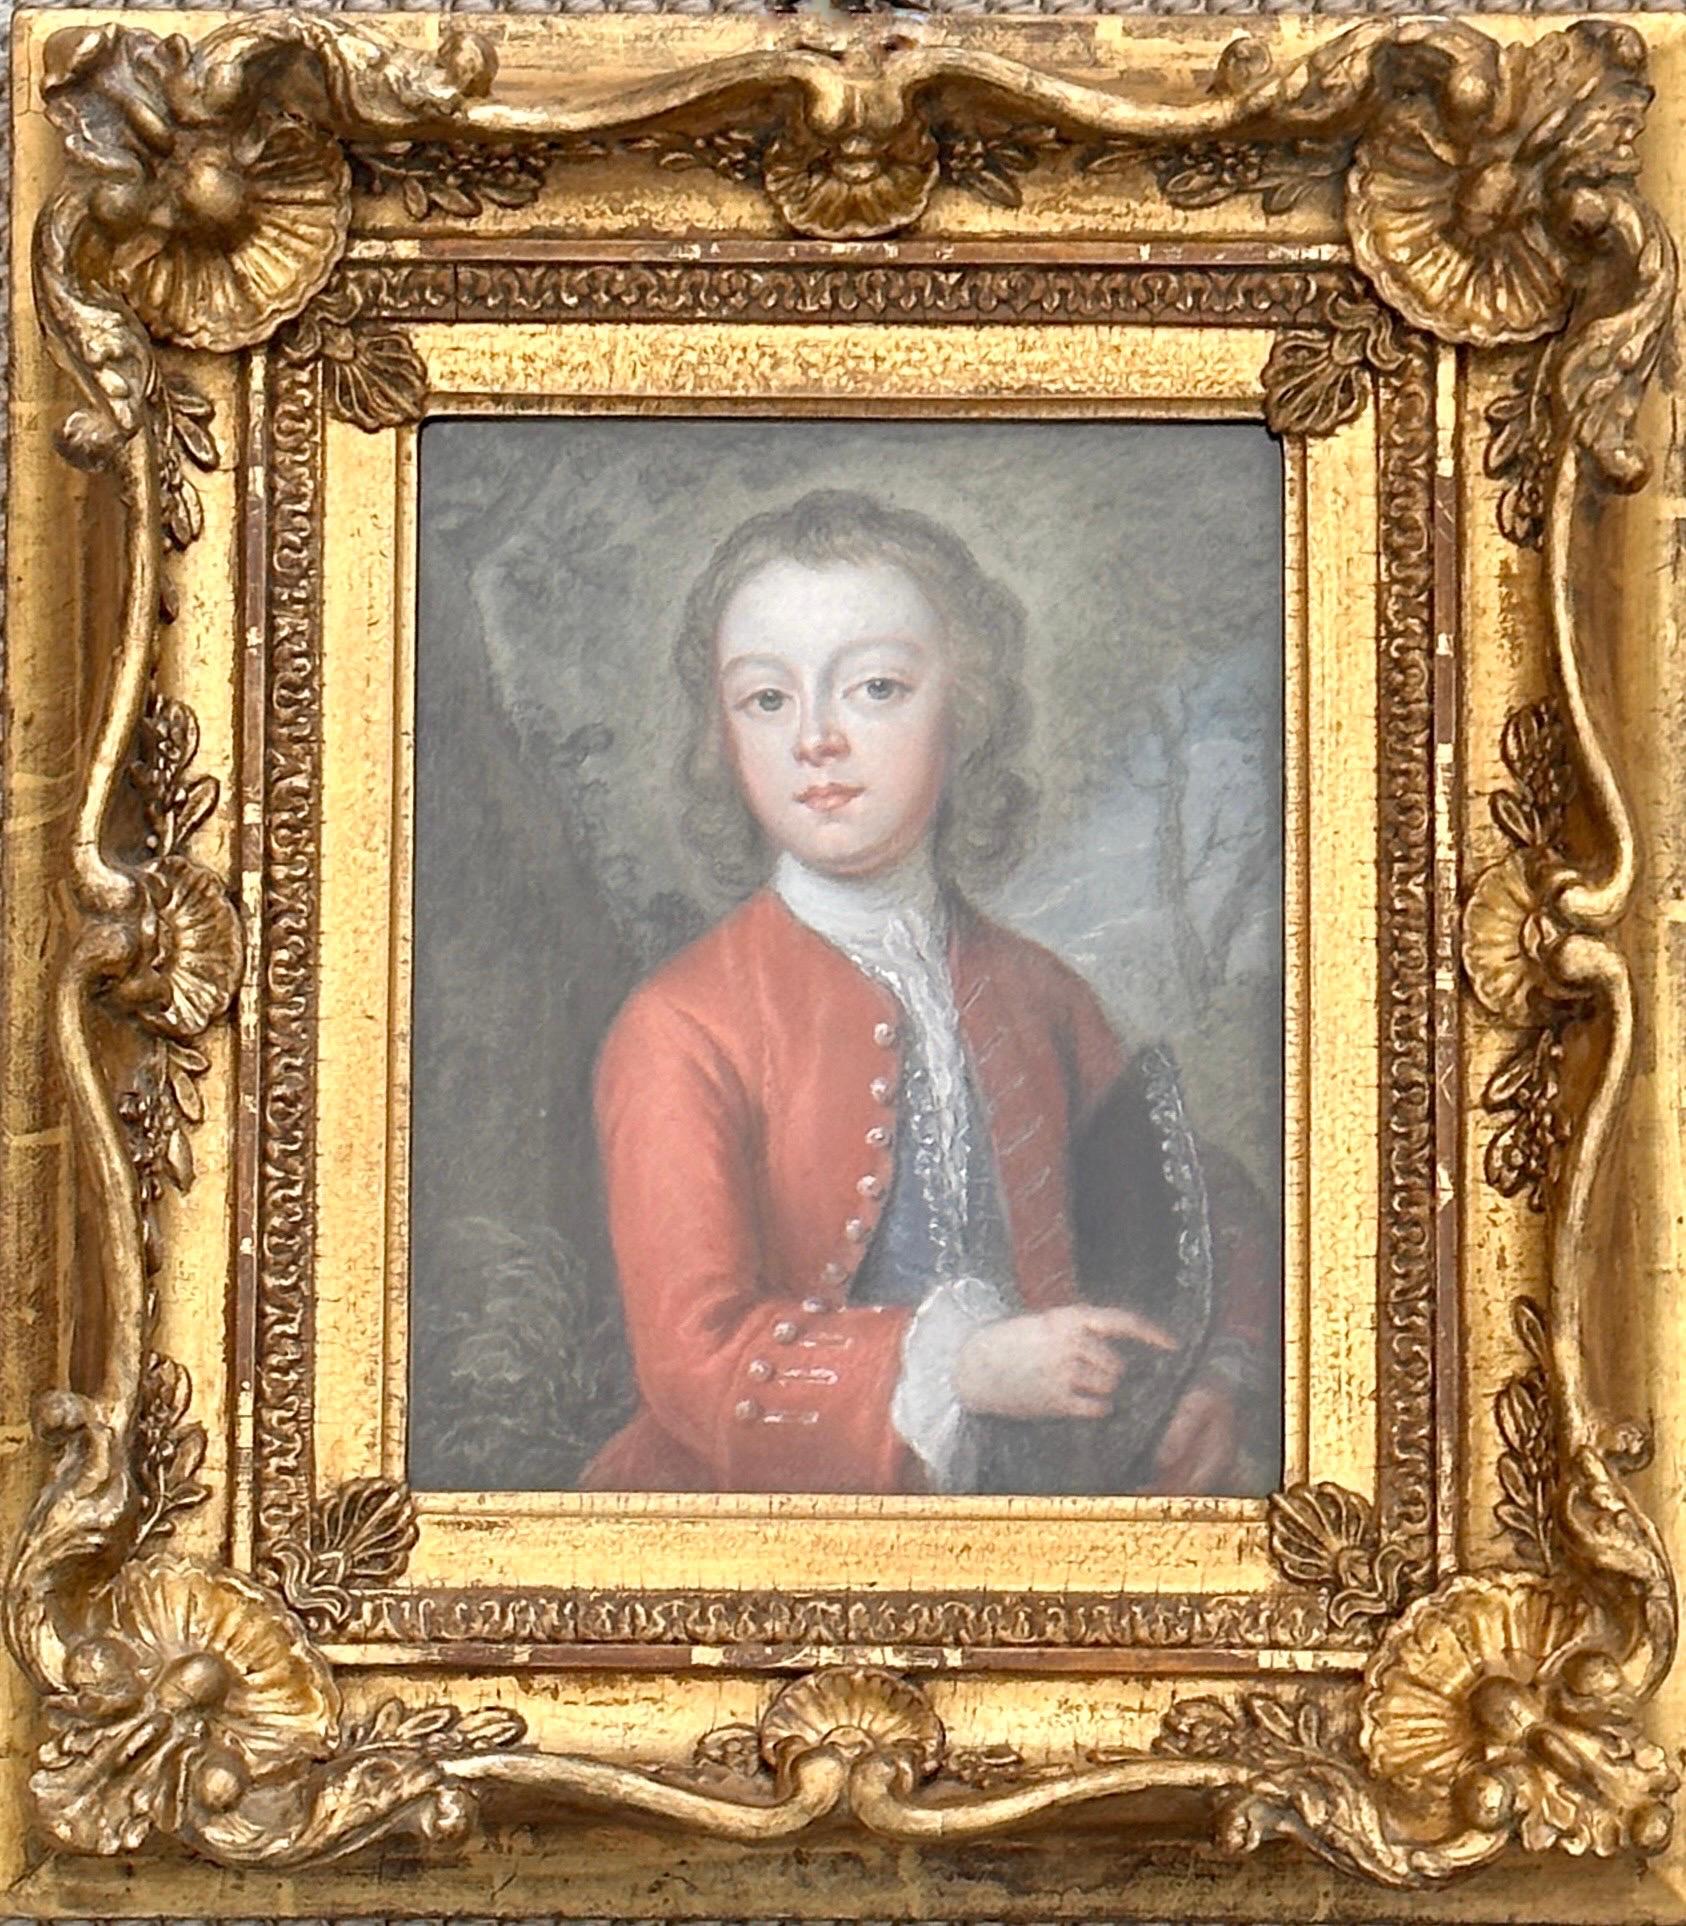 Arthur Pond Portrait Painting - 18th century pastel portrait of a young boy in a wooded landscape